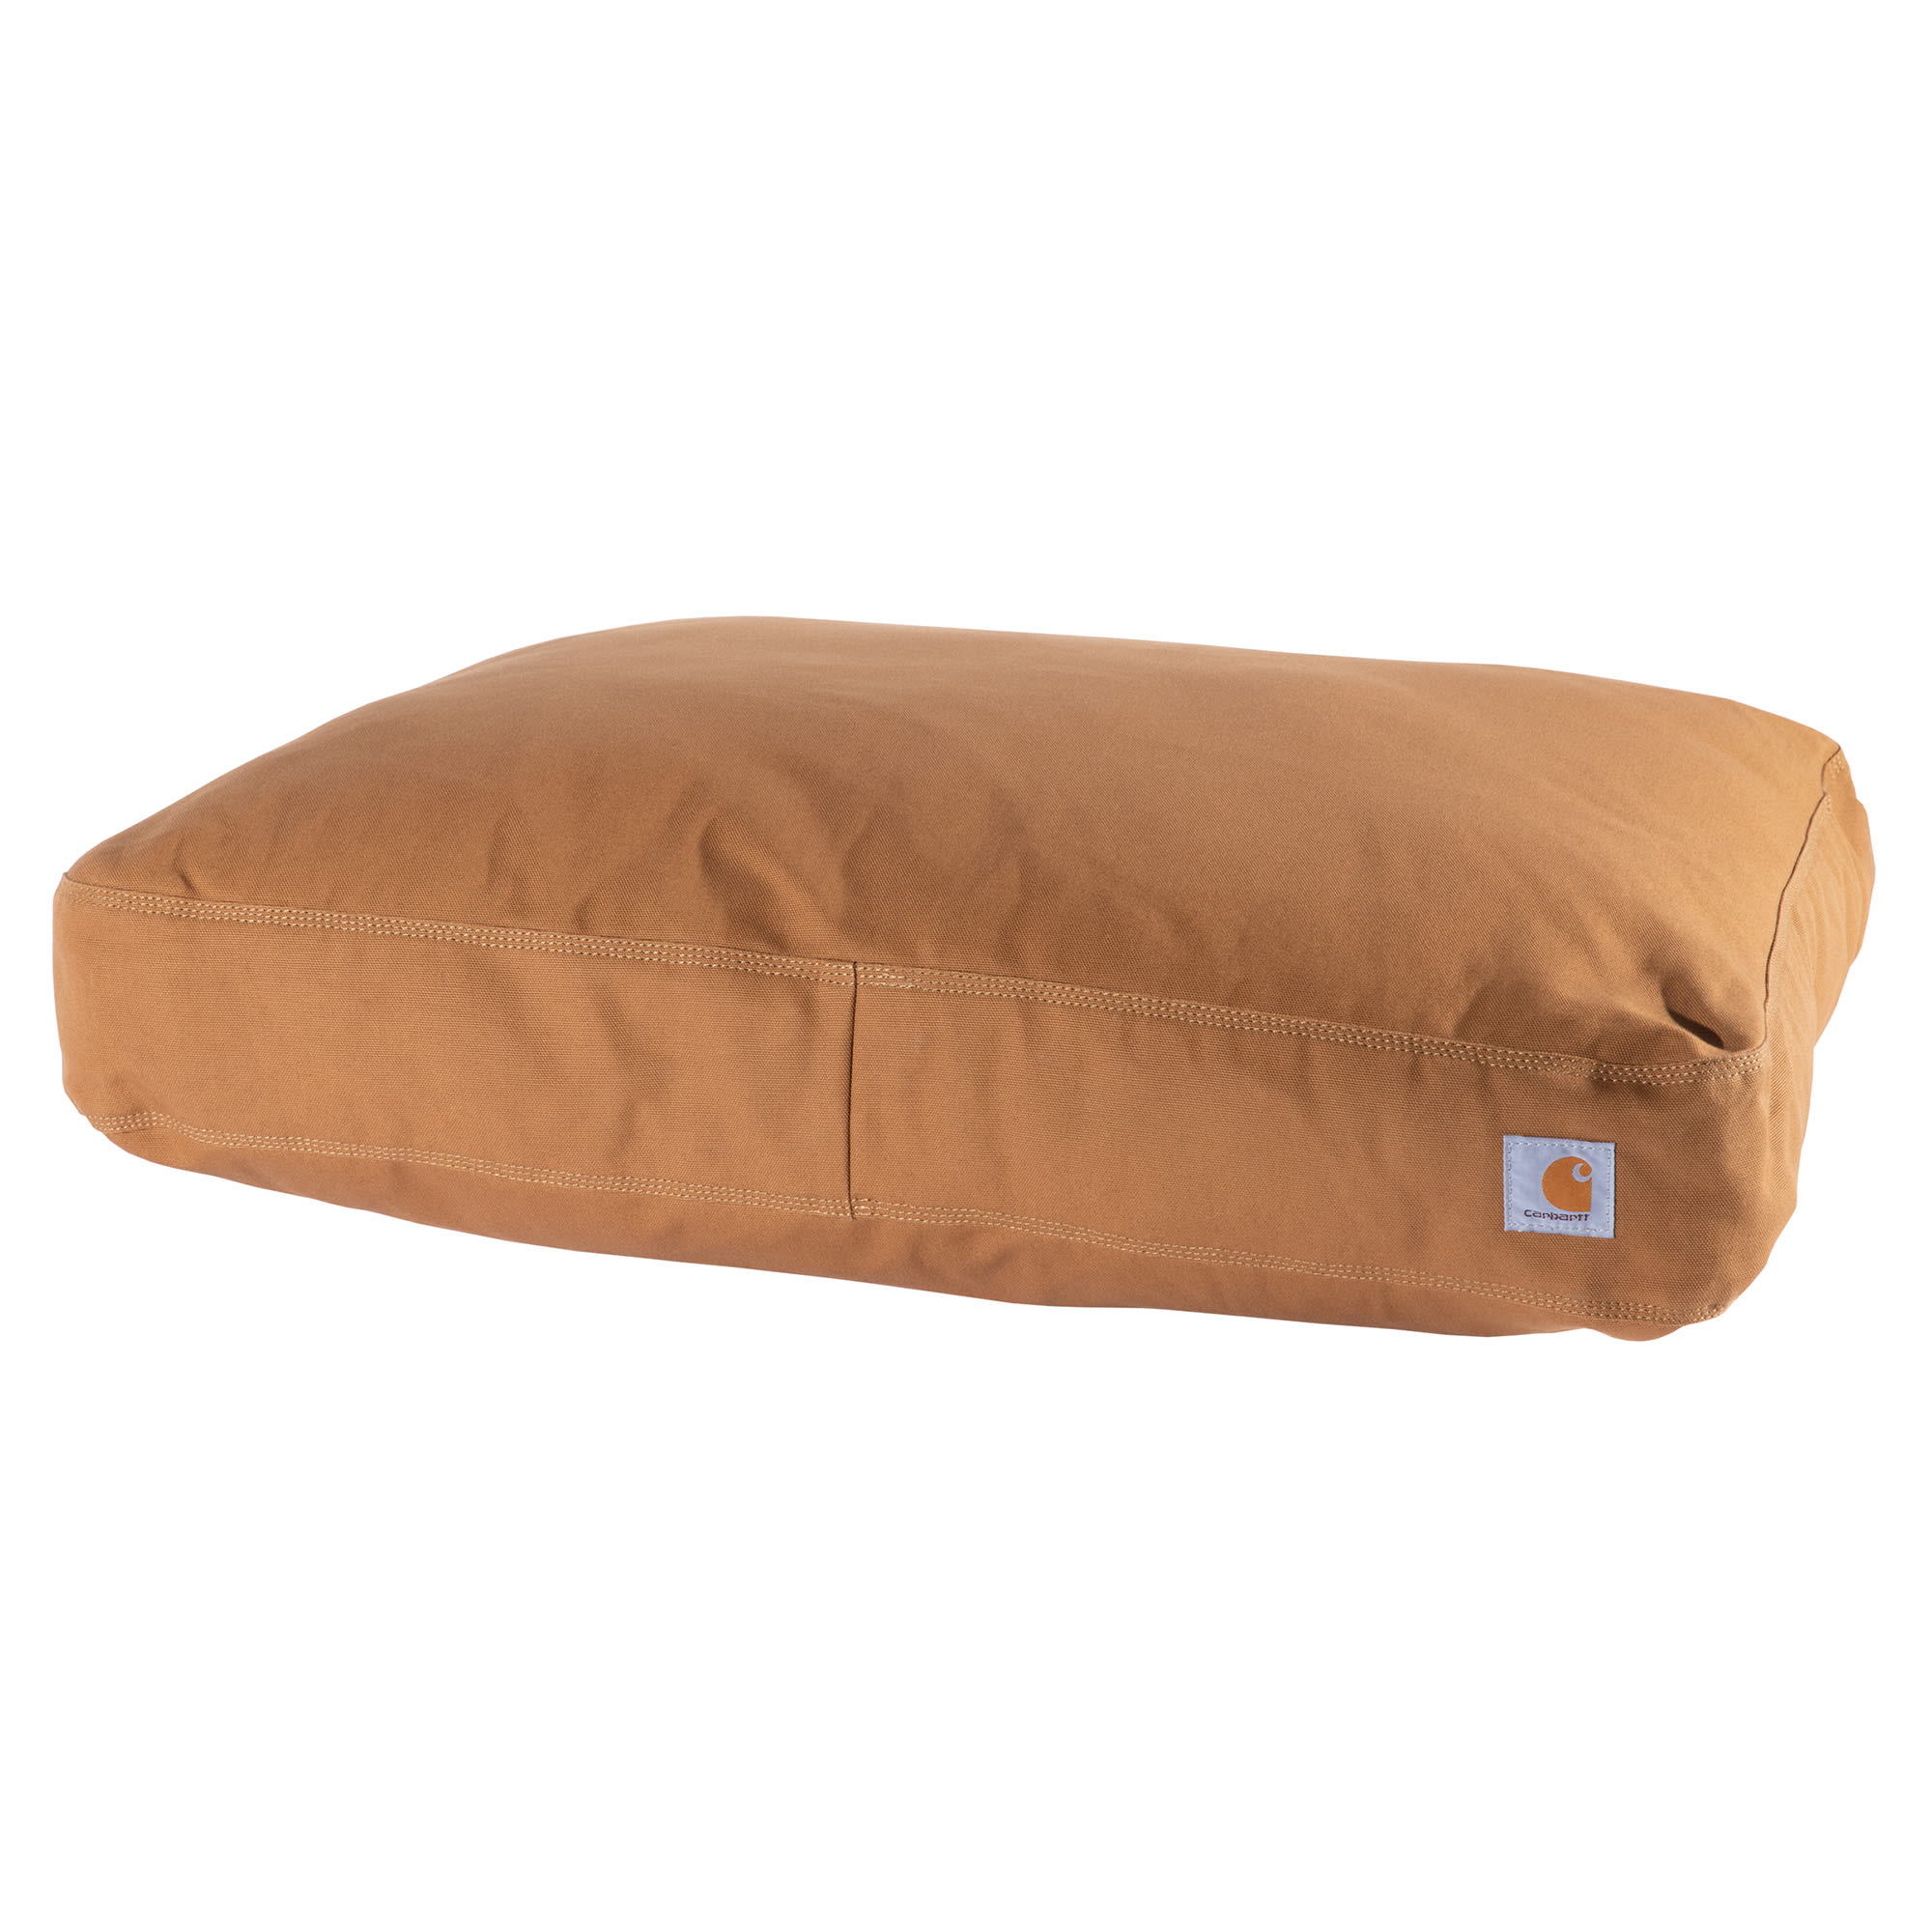 Carhartt Brown Durable Canvas Dog Bed, 28